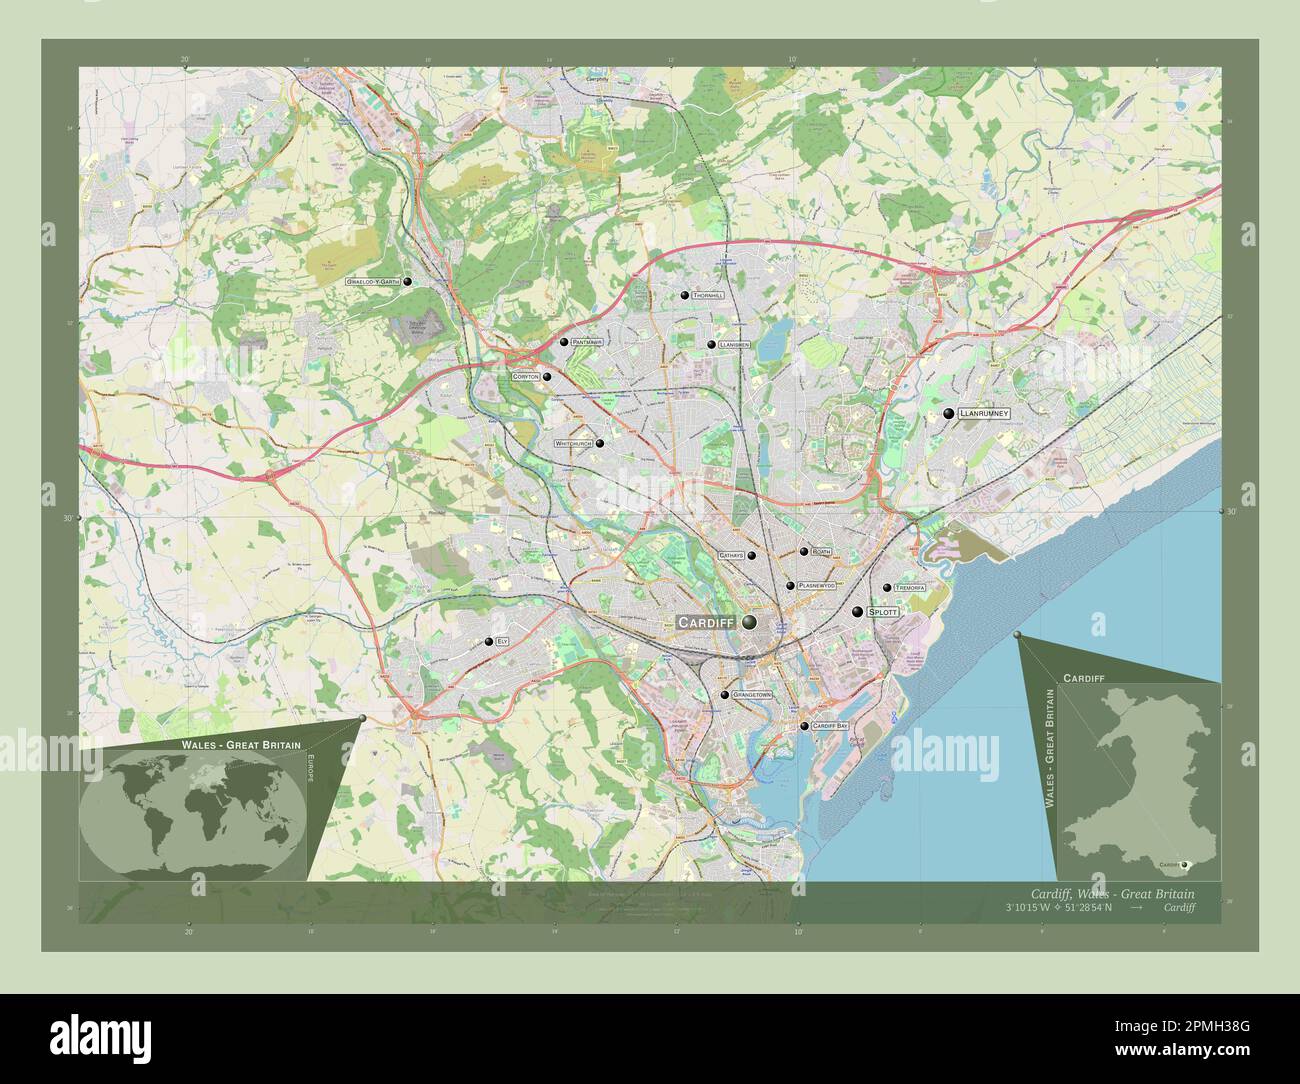 Cardiff, region of Wales - Great Britain. Open Street Map. Locations and names of major cities of the region. Corner auxiliary location maps Stock Photo